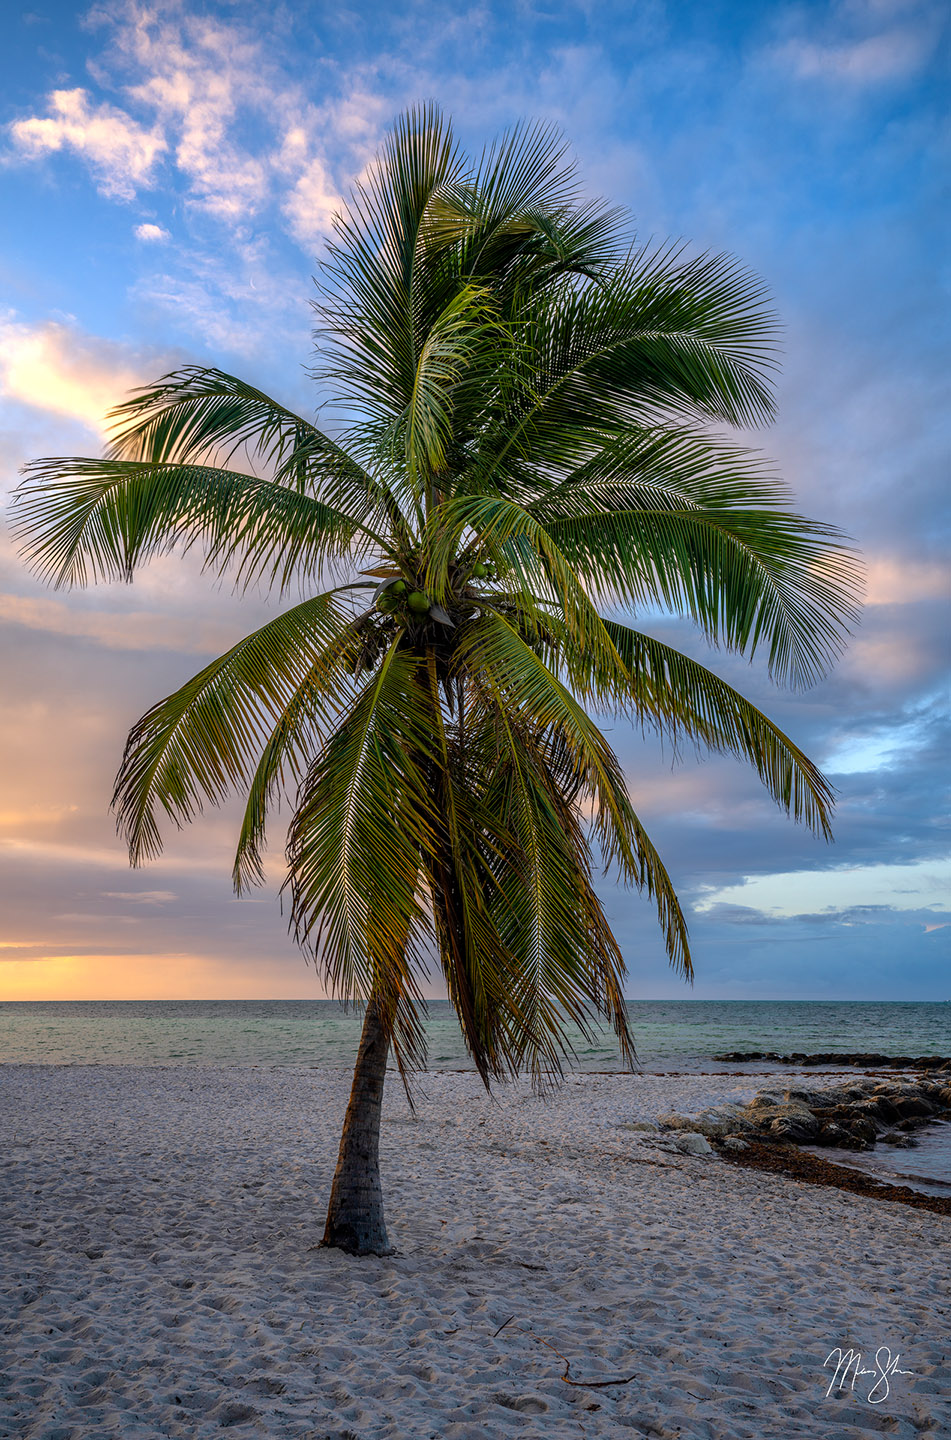 Palm trees in the Florida Keys